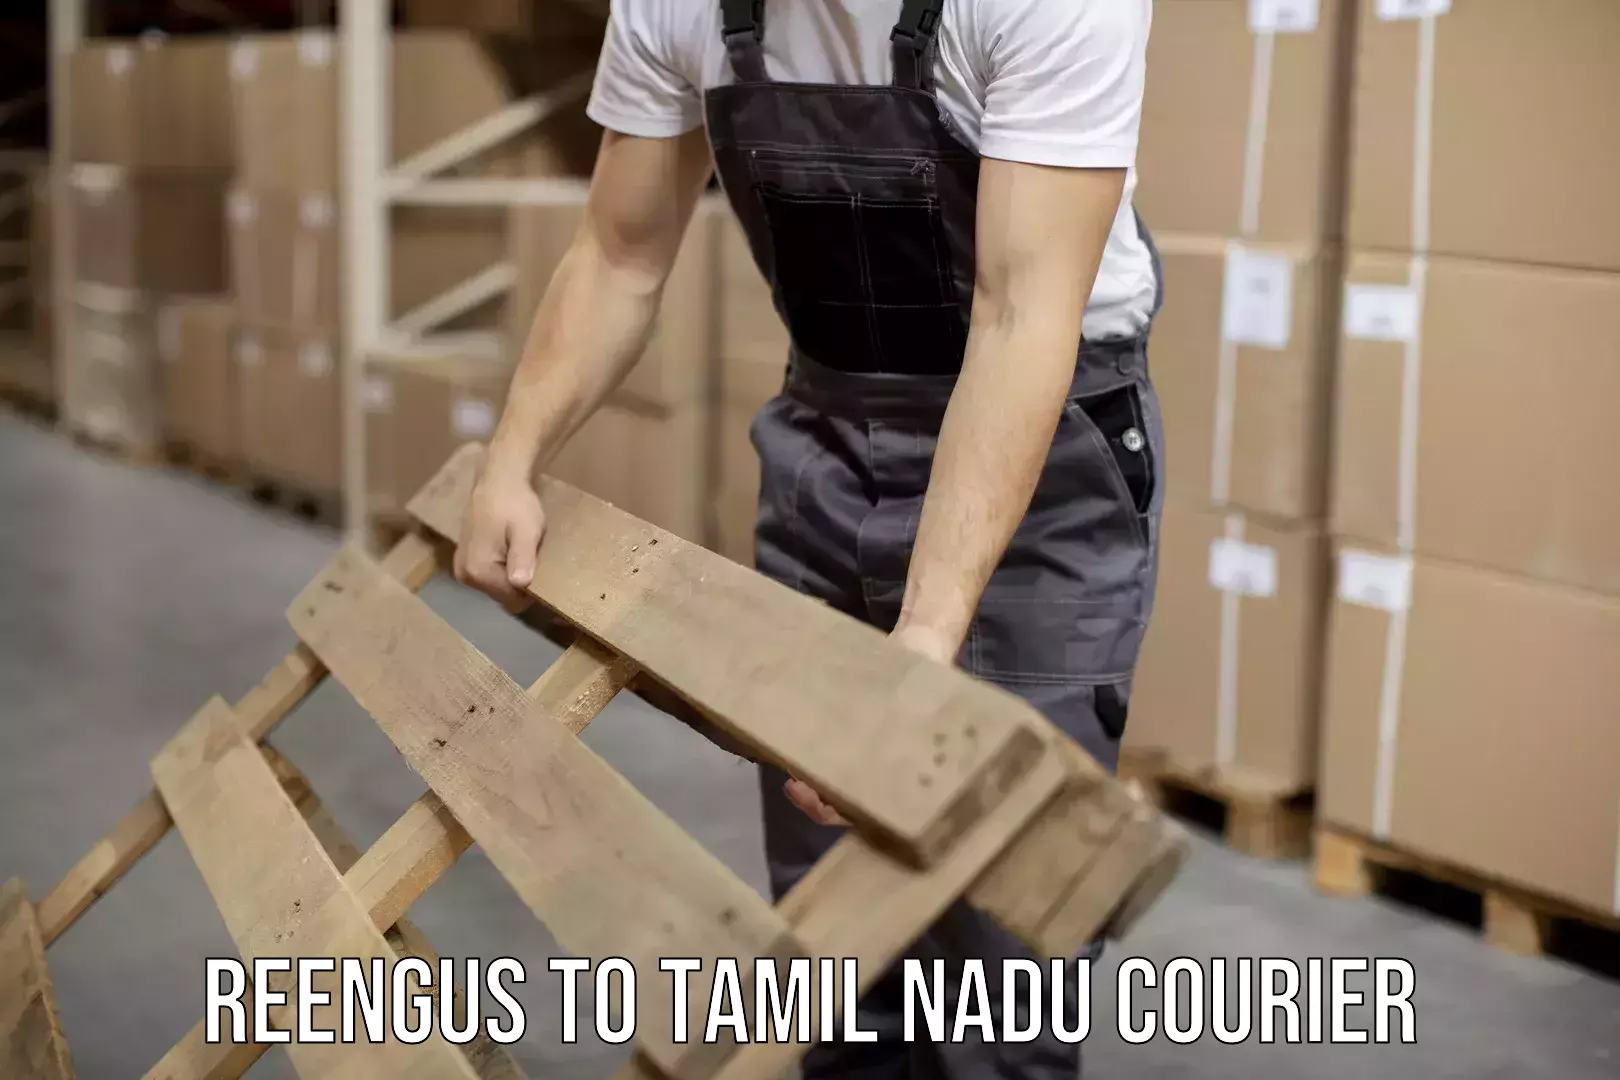 Reliable courier services Reengus to Tamil Nadu